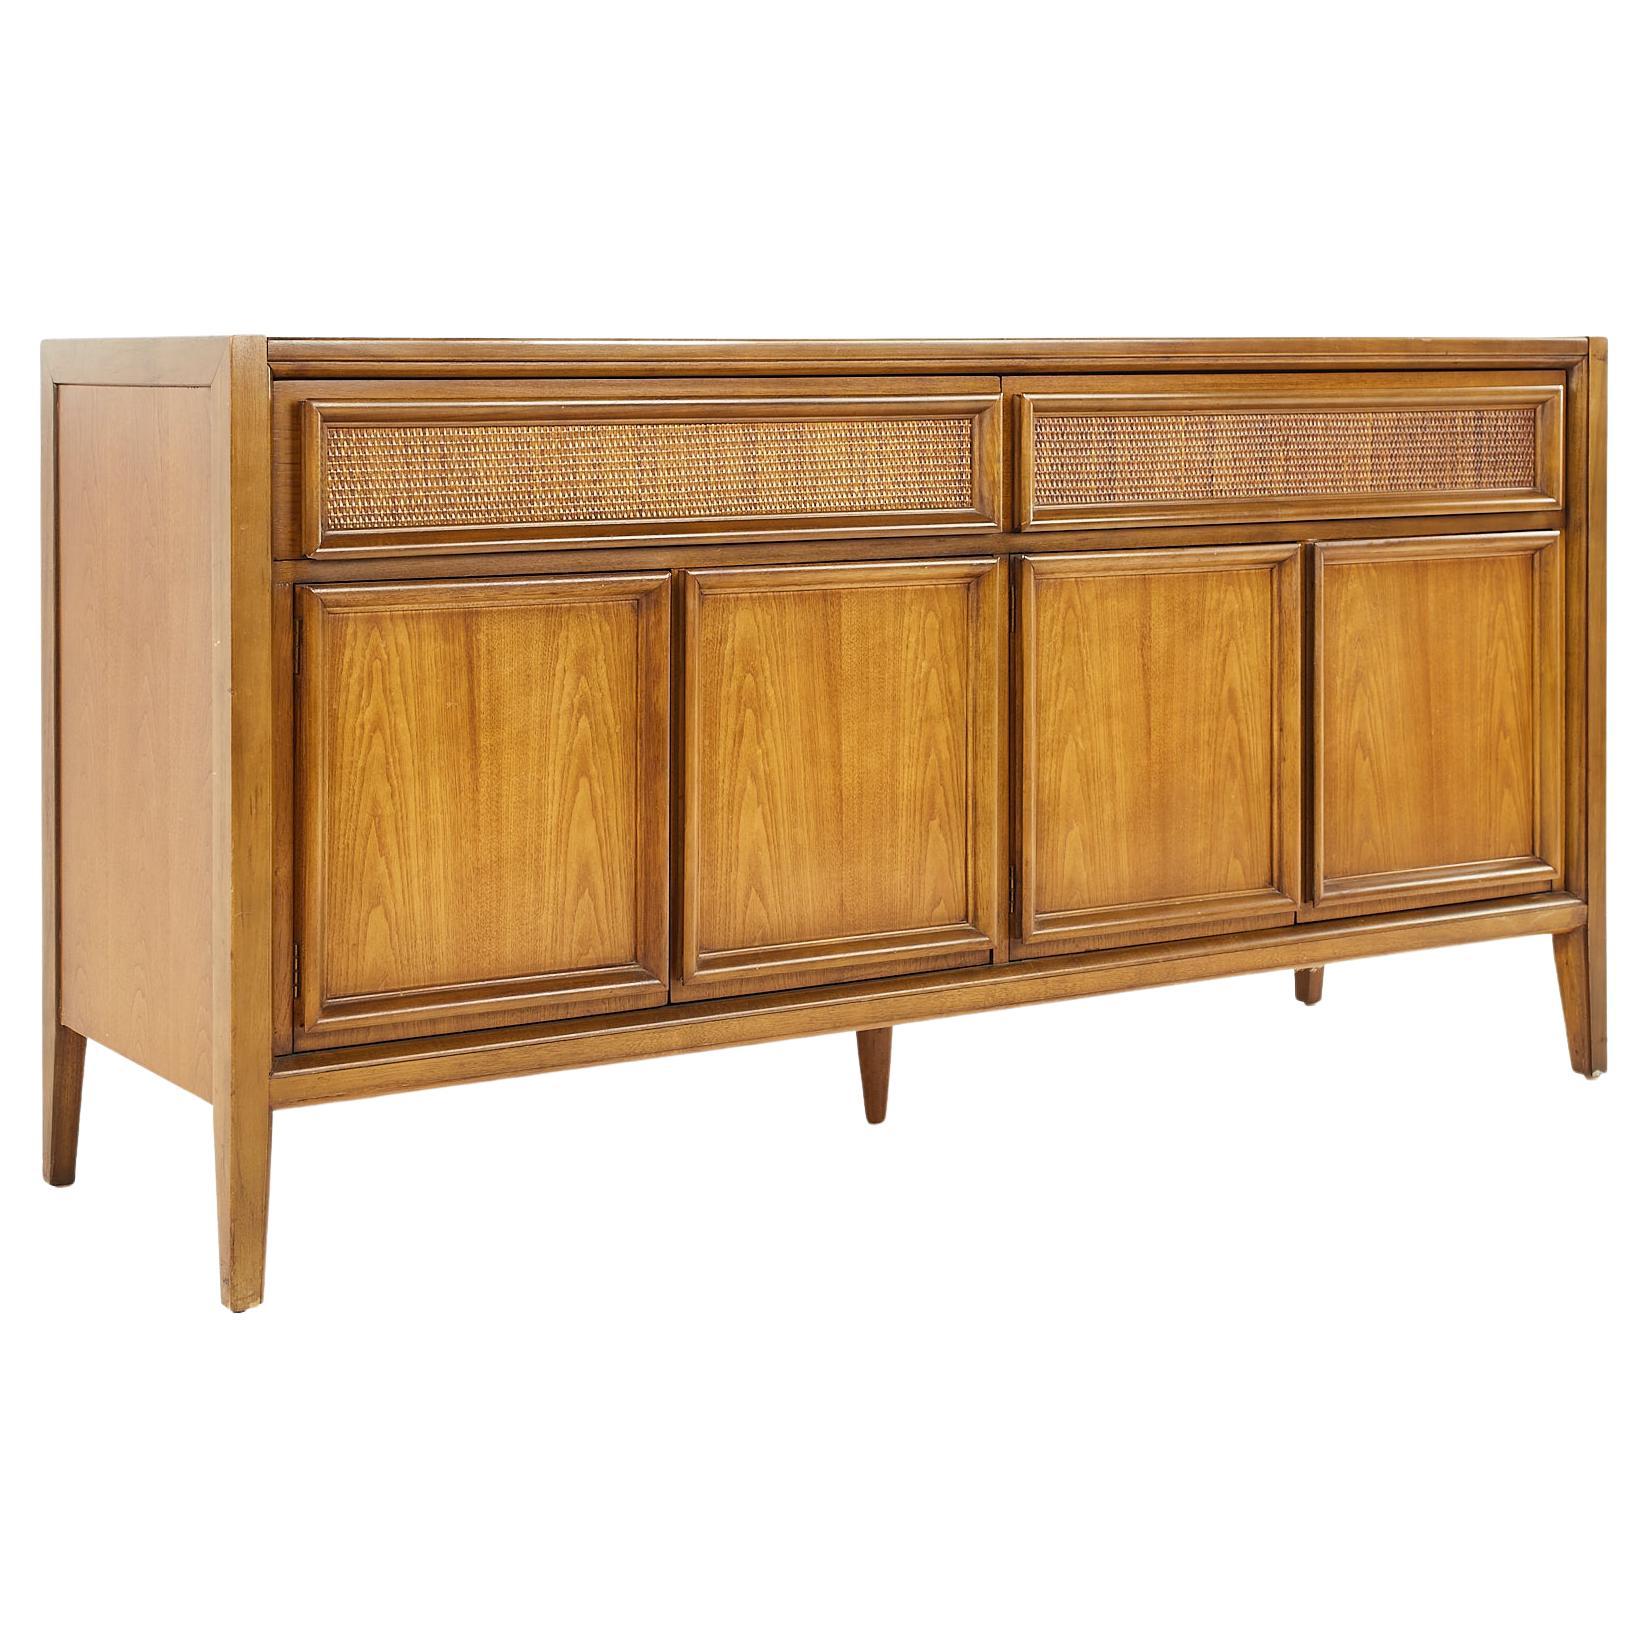 Founders Style Mid Century Walnut Basket Woven Front Credenza Buffet